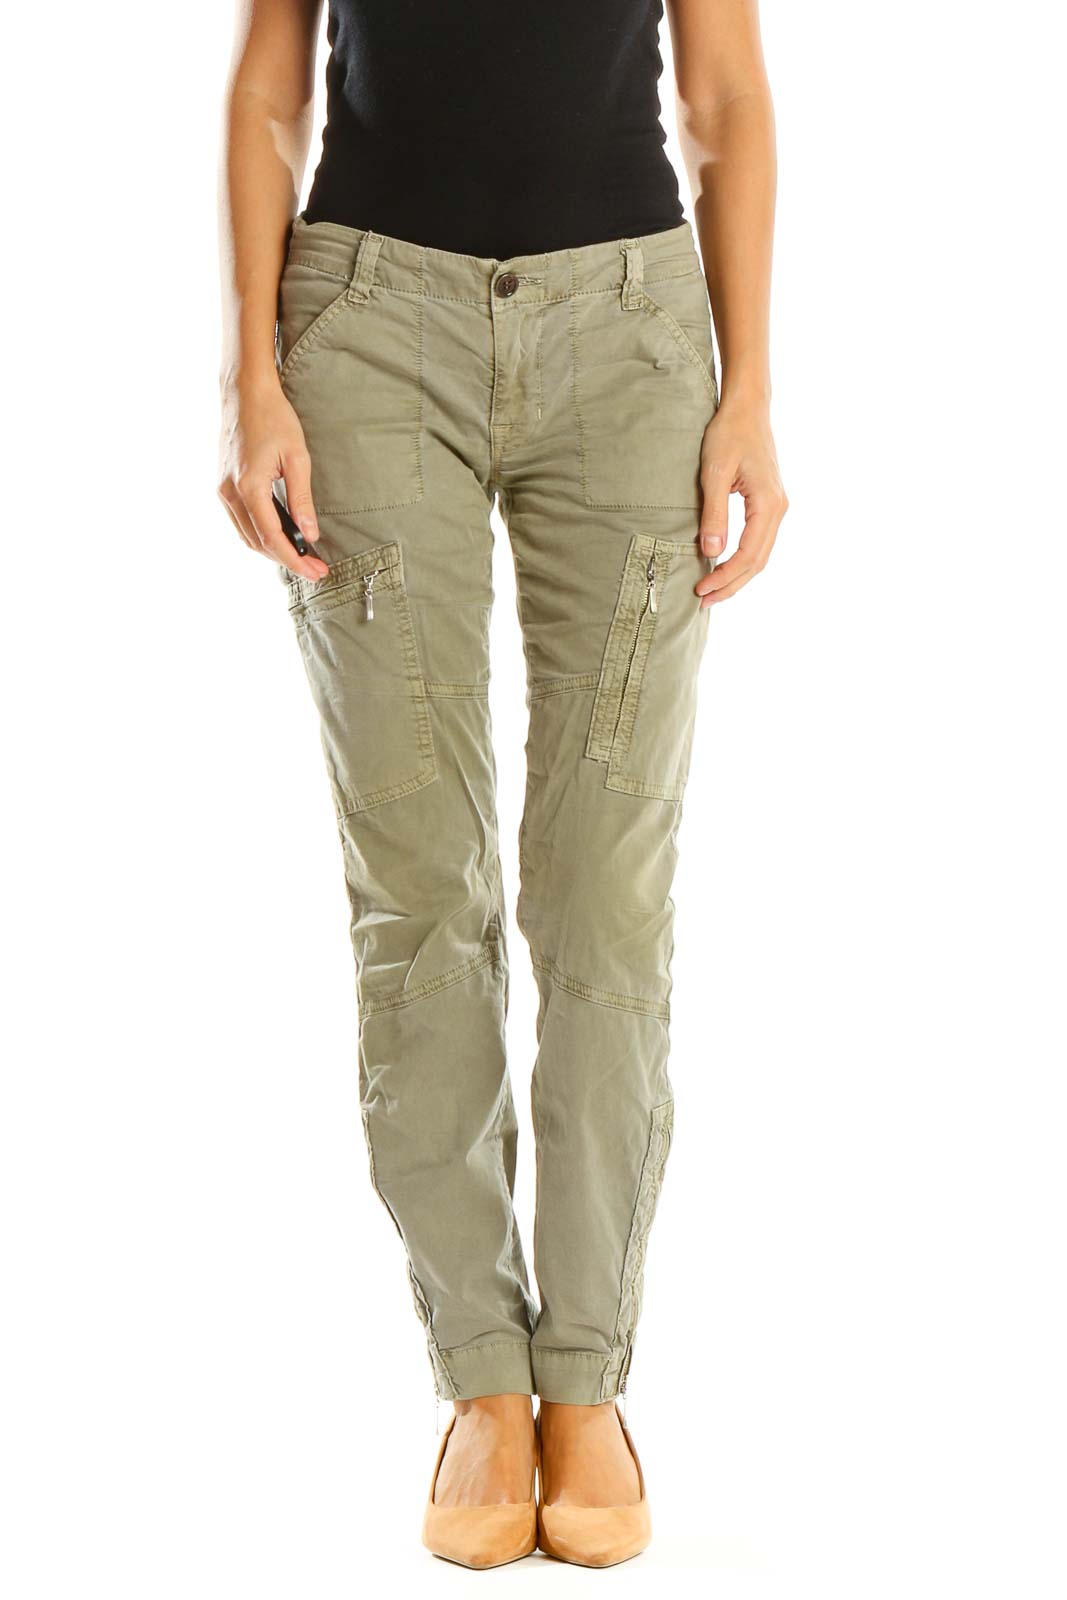 Green Solid Casual Cargos Pants Front